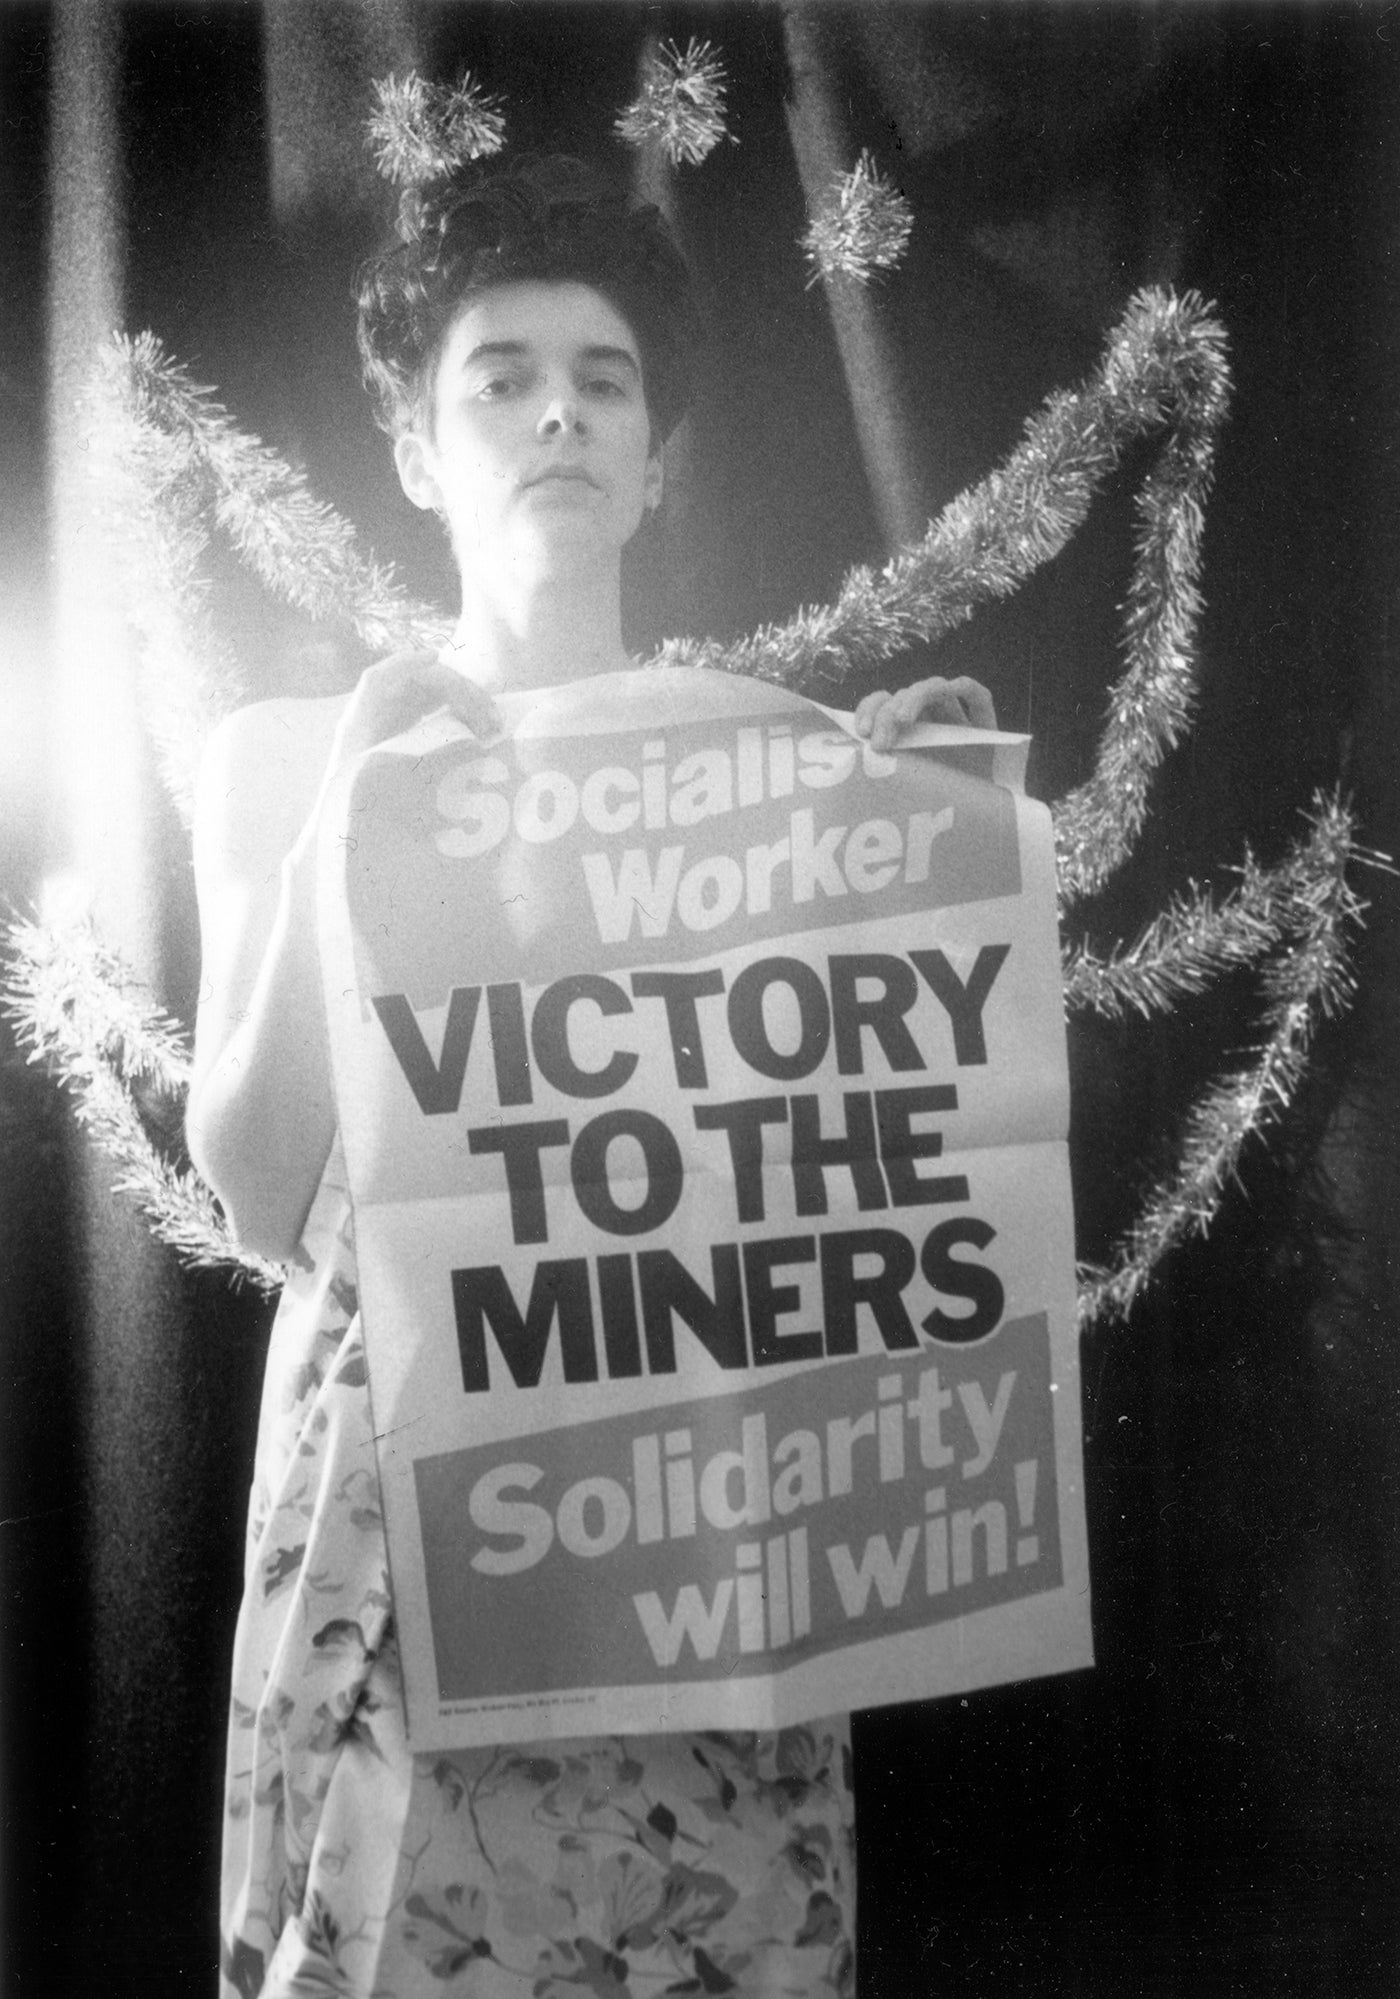 Alison Lloyd, ‘SUPPORT THE MINERS, Solidarity will win!’ (1984)